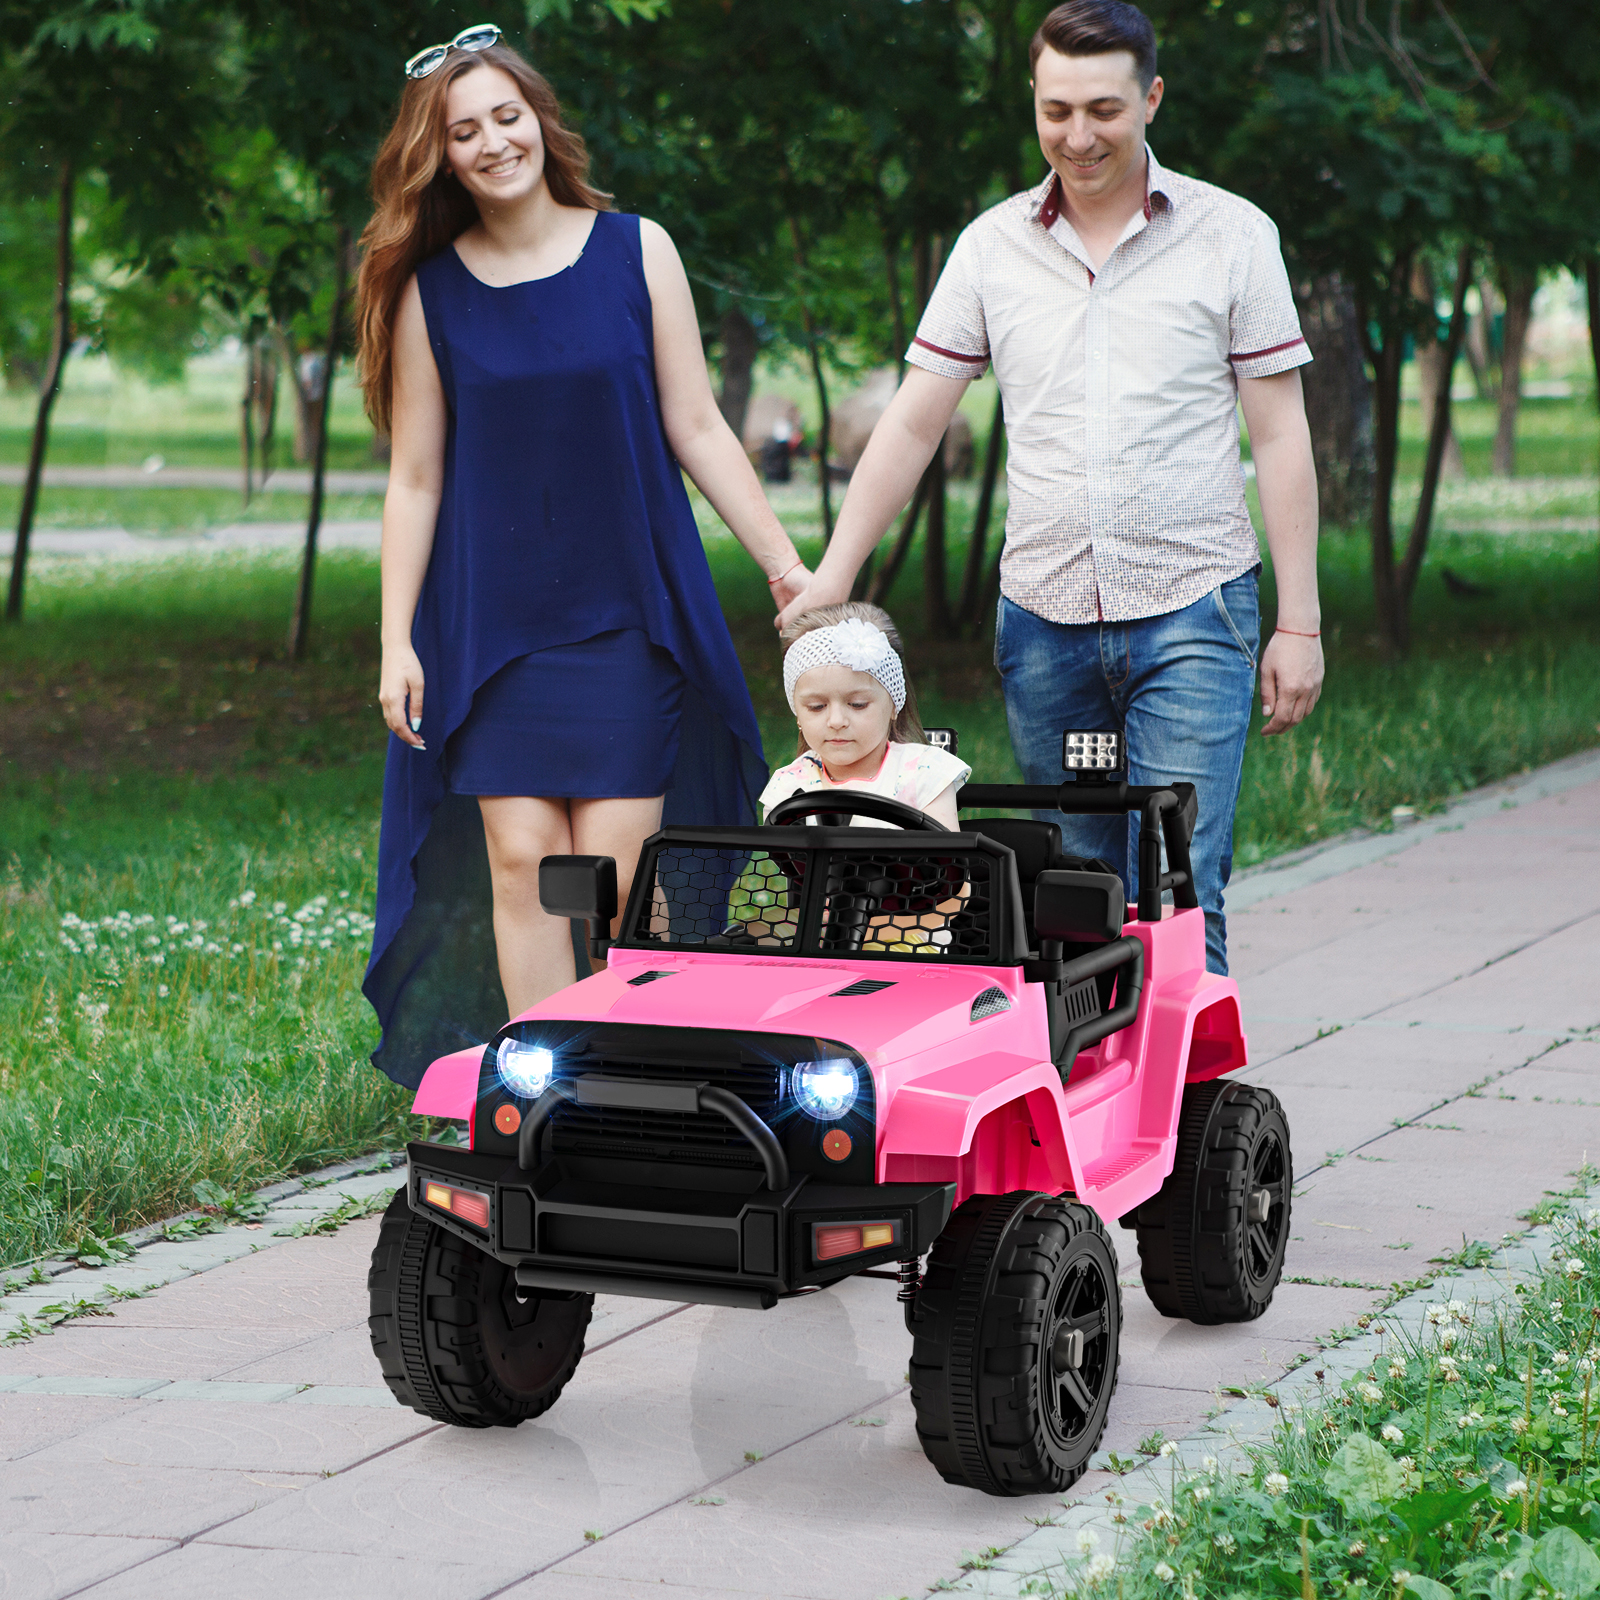 Topbuy 12V Kids Ride On Car Electric Vehicle Jeep with Parental Remote Music Horn Headlights Slow Start Function Pink - image 2 of 10